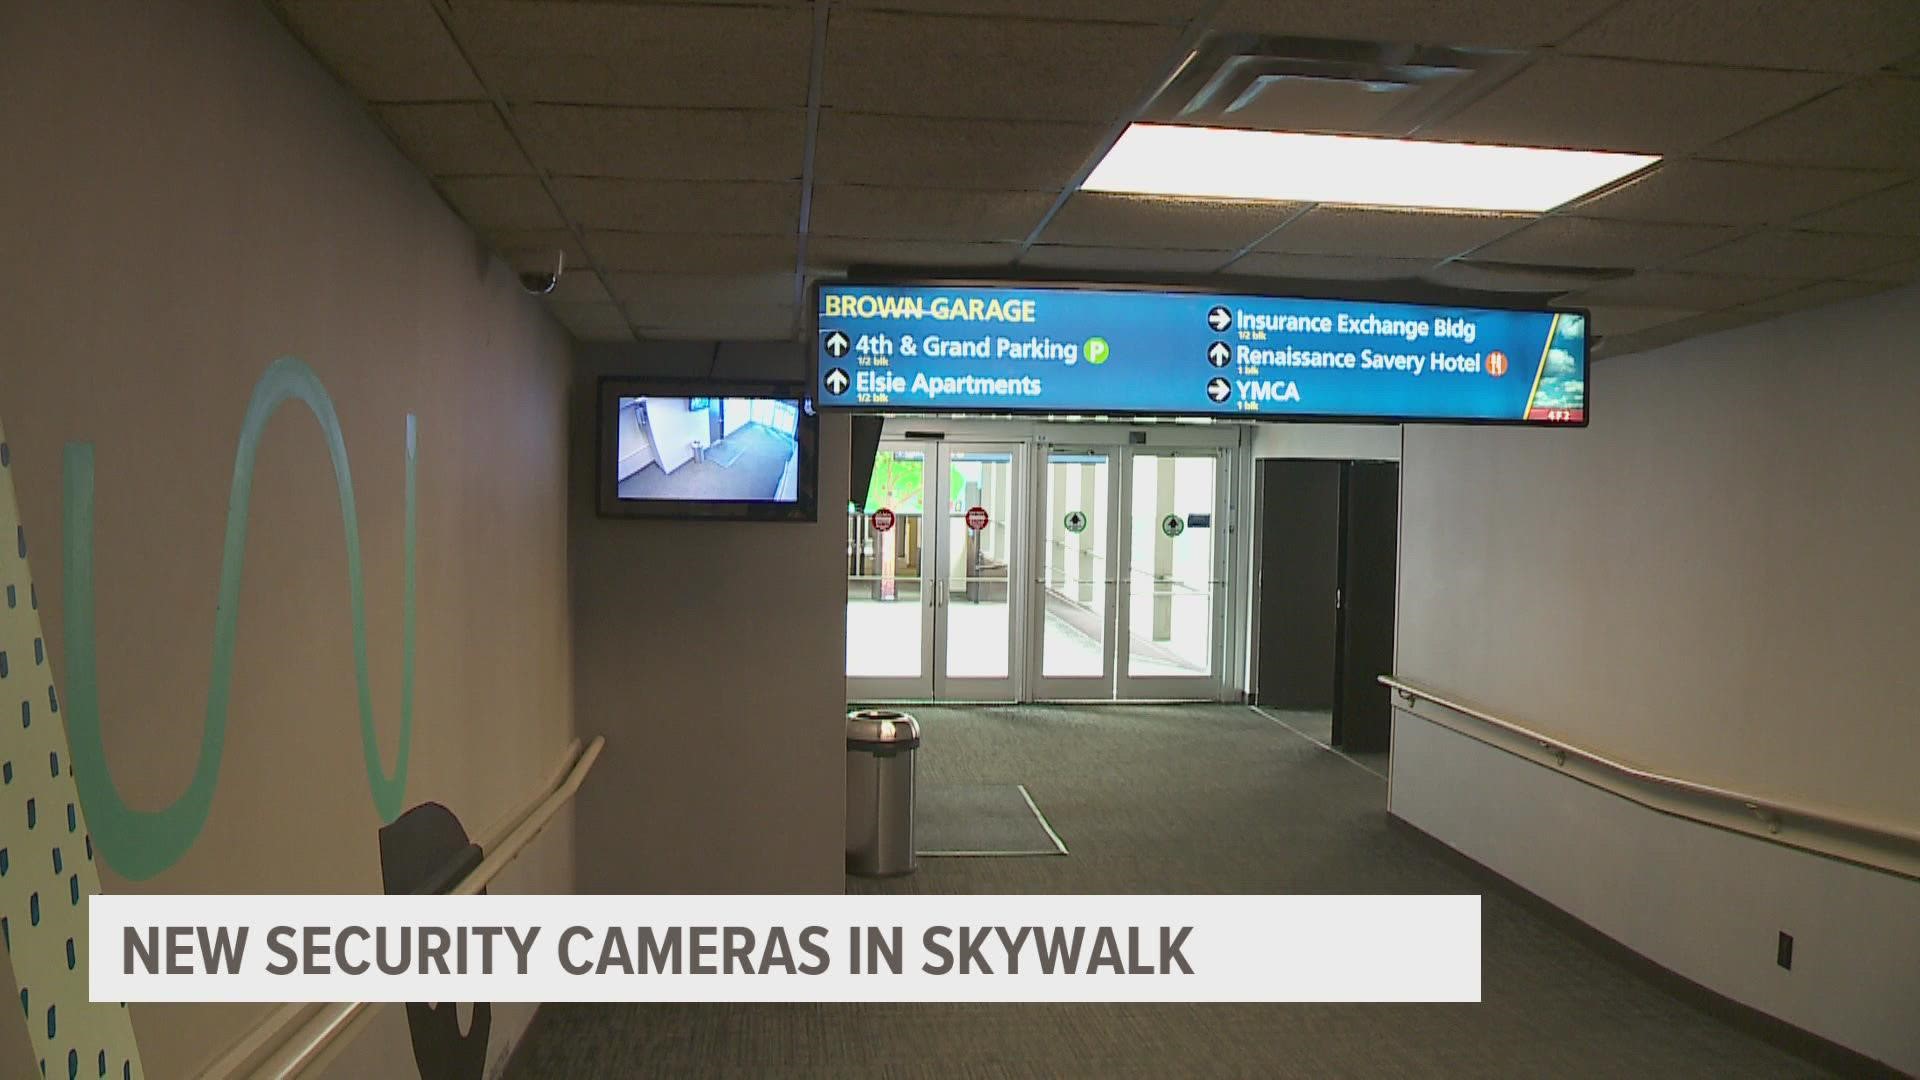 After an assault on a young couple in 2019, the city is taking steps to ensure people's safety on the skywalks.